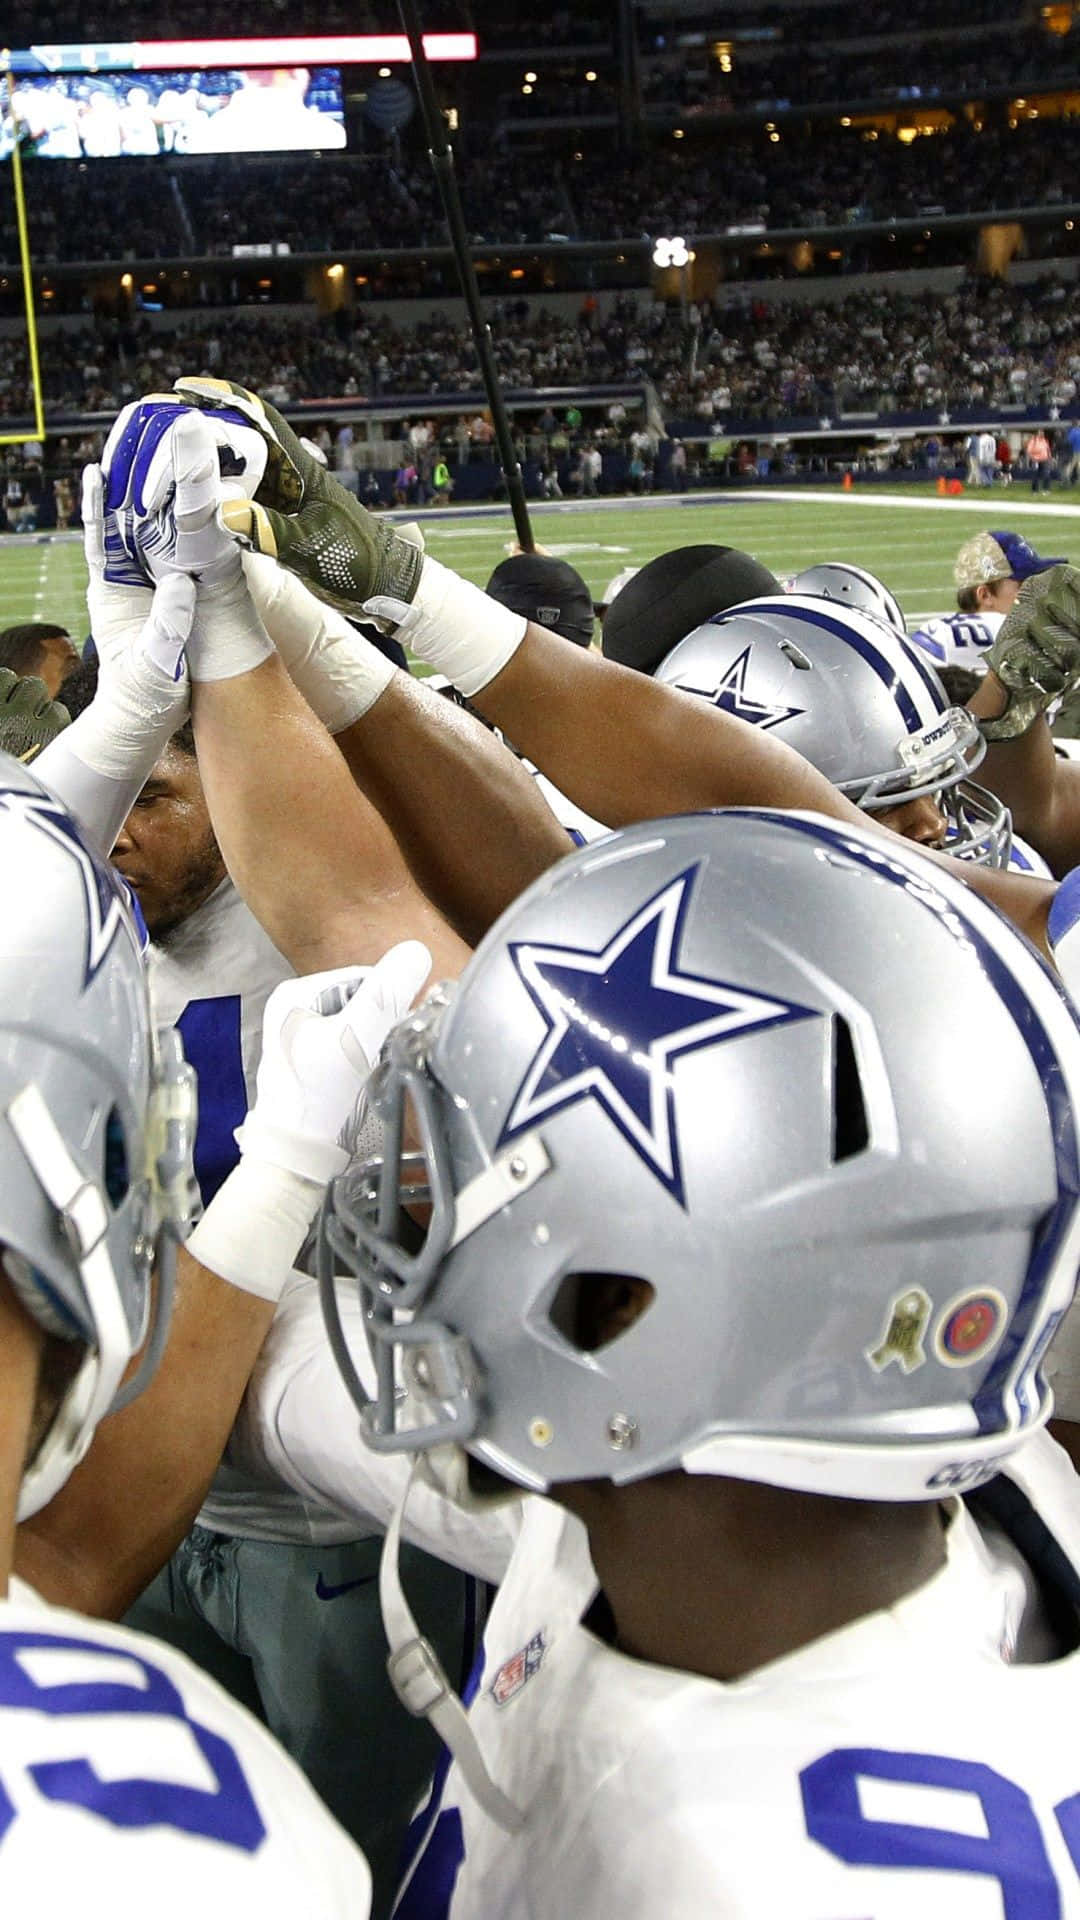 Show Your Cowboys Love With an iPhone Wallpaper